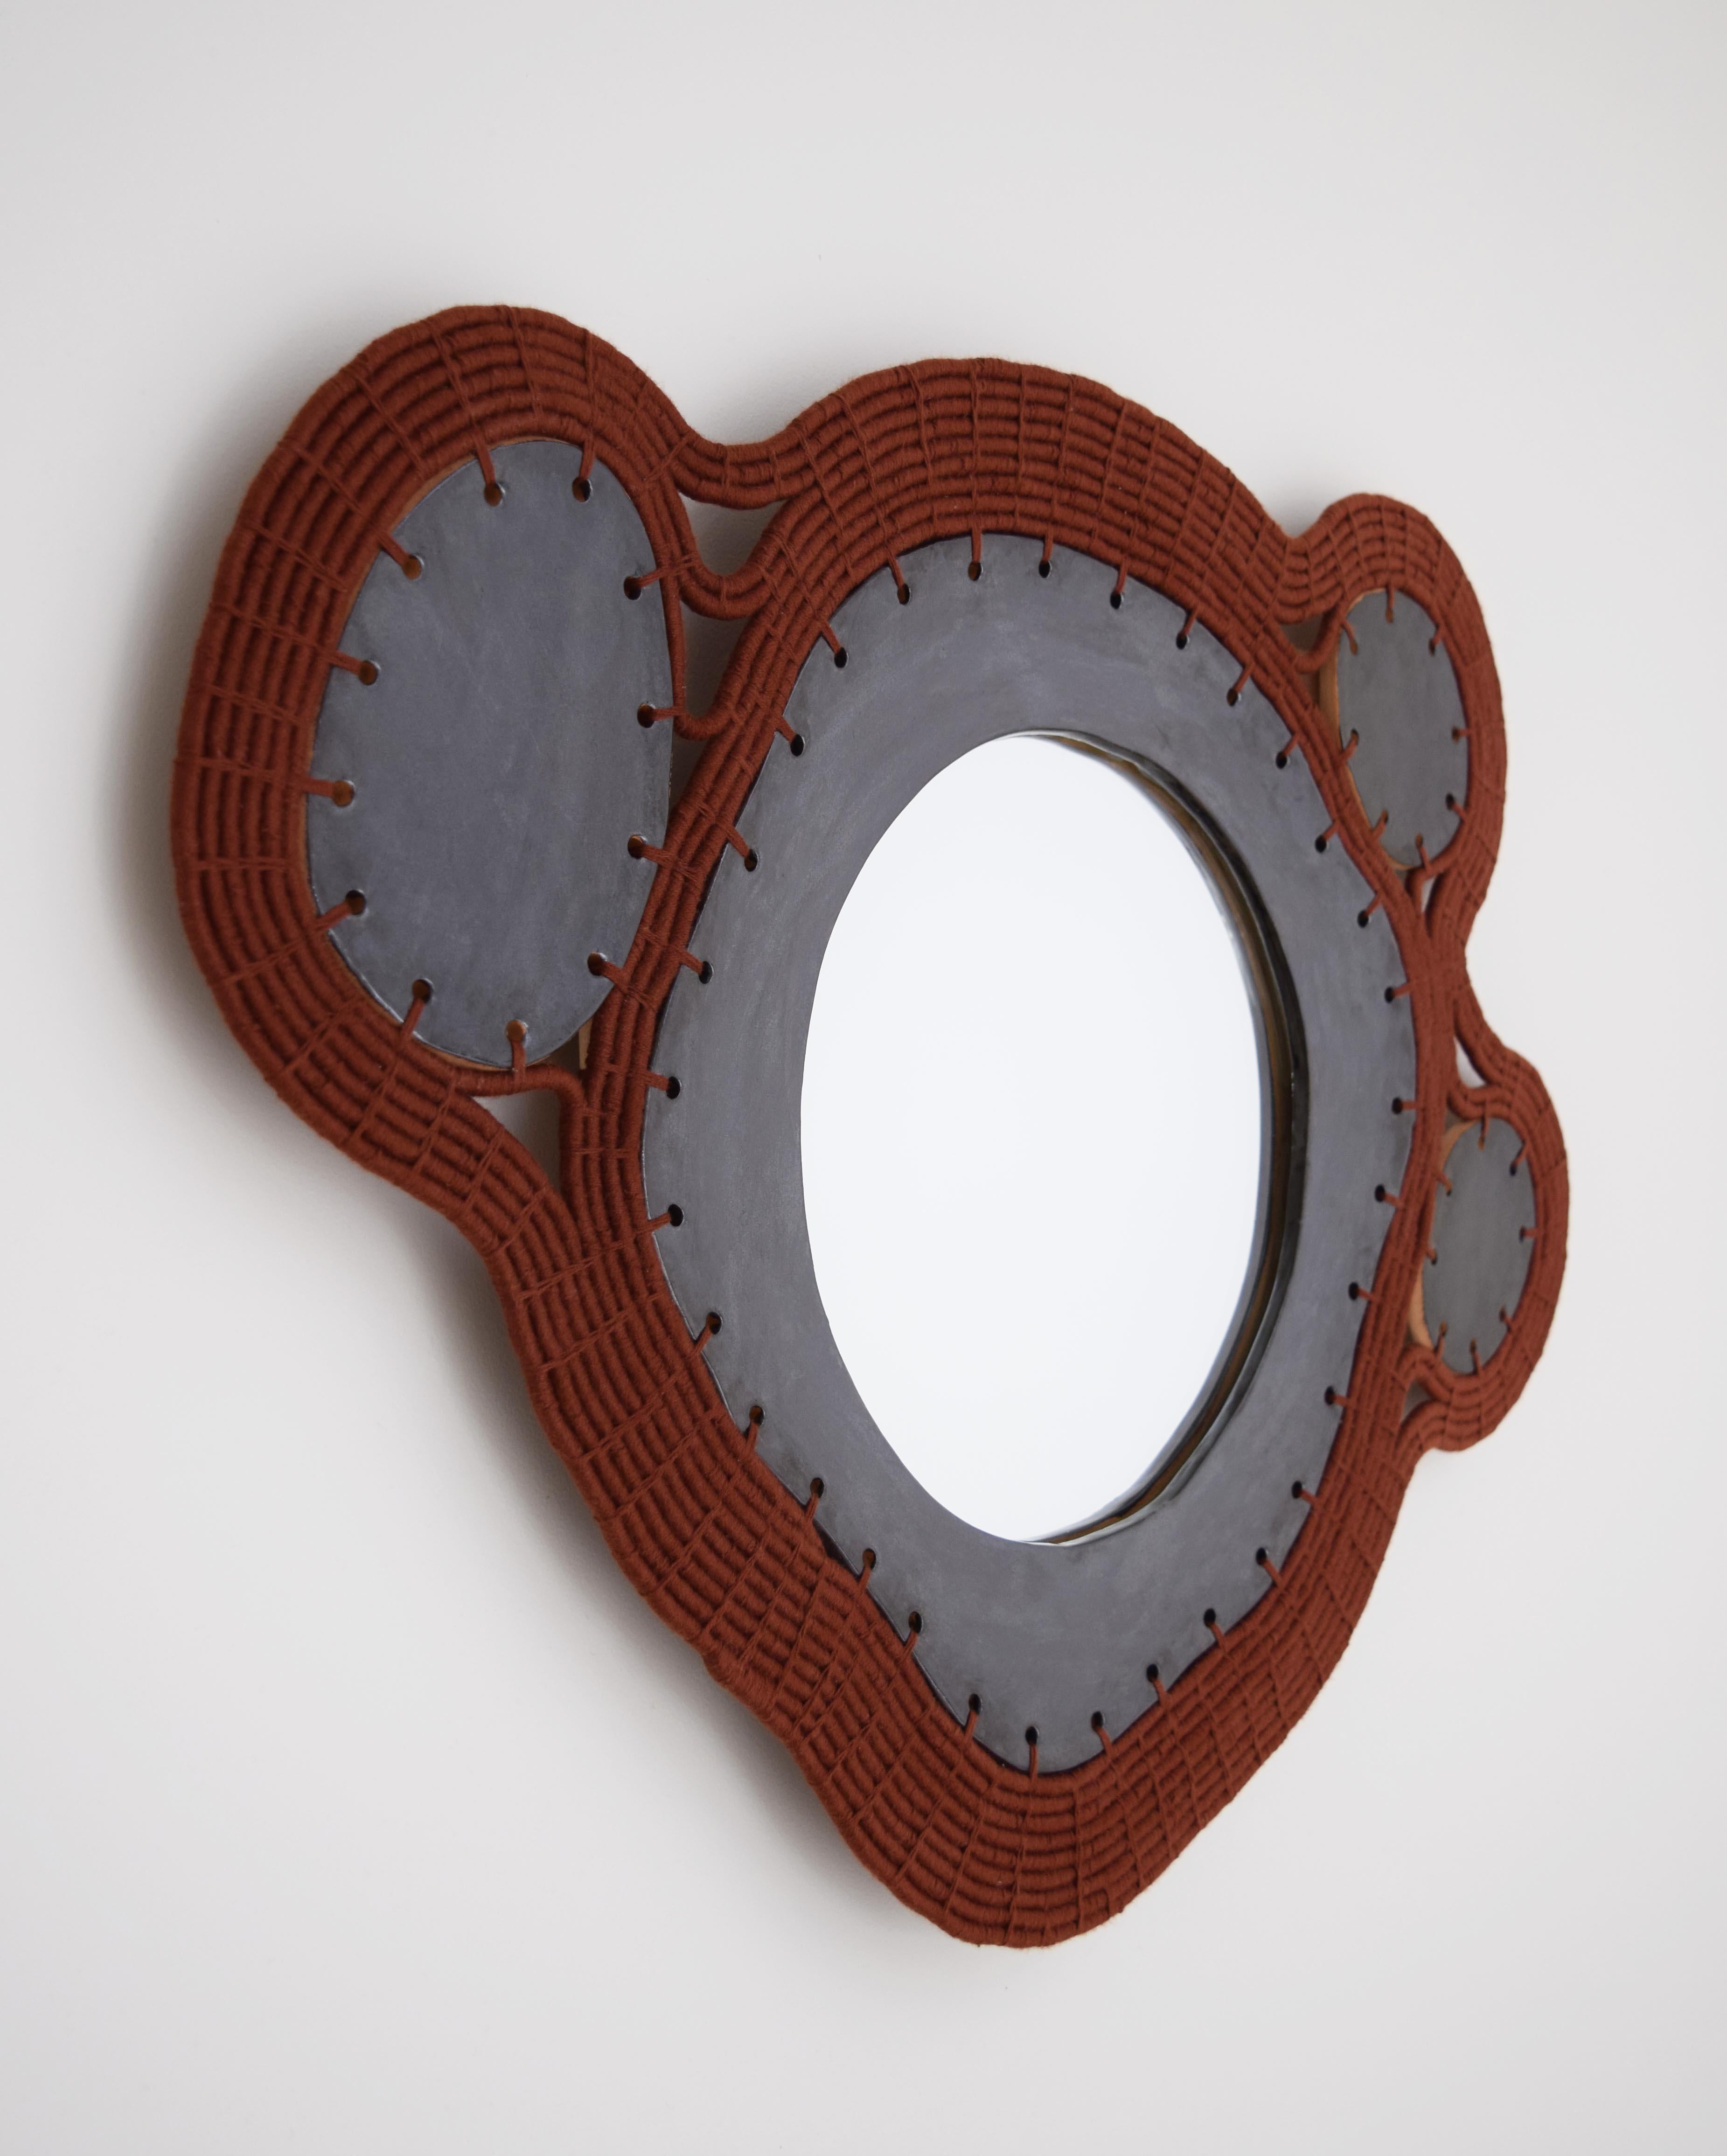 Mirror #794 by Karen Gayle Tinney.

One of a kind - available without a lead time.

Mirror with a hand formed stoneware frame glazed black. Woven rusty brown cotton exterior frame with inlaid ceramic panels. Black felt backing on mirror with hanging